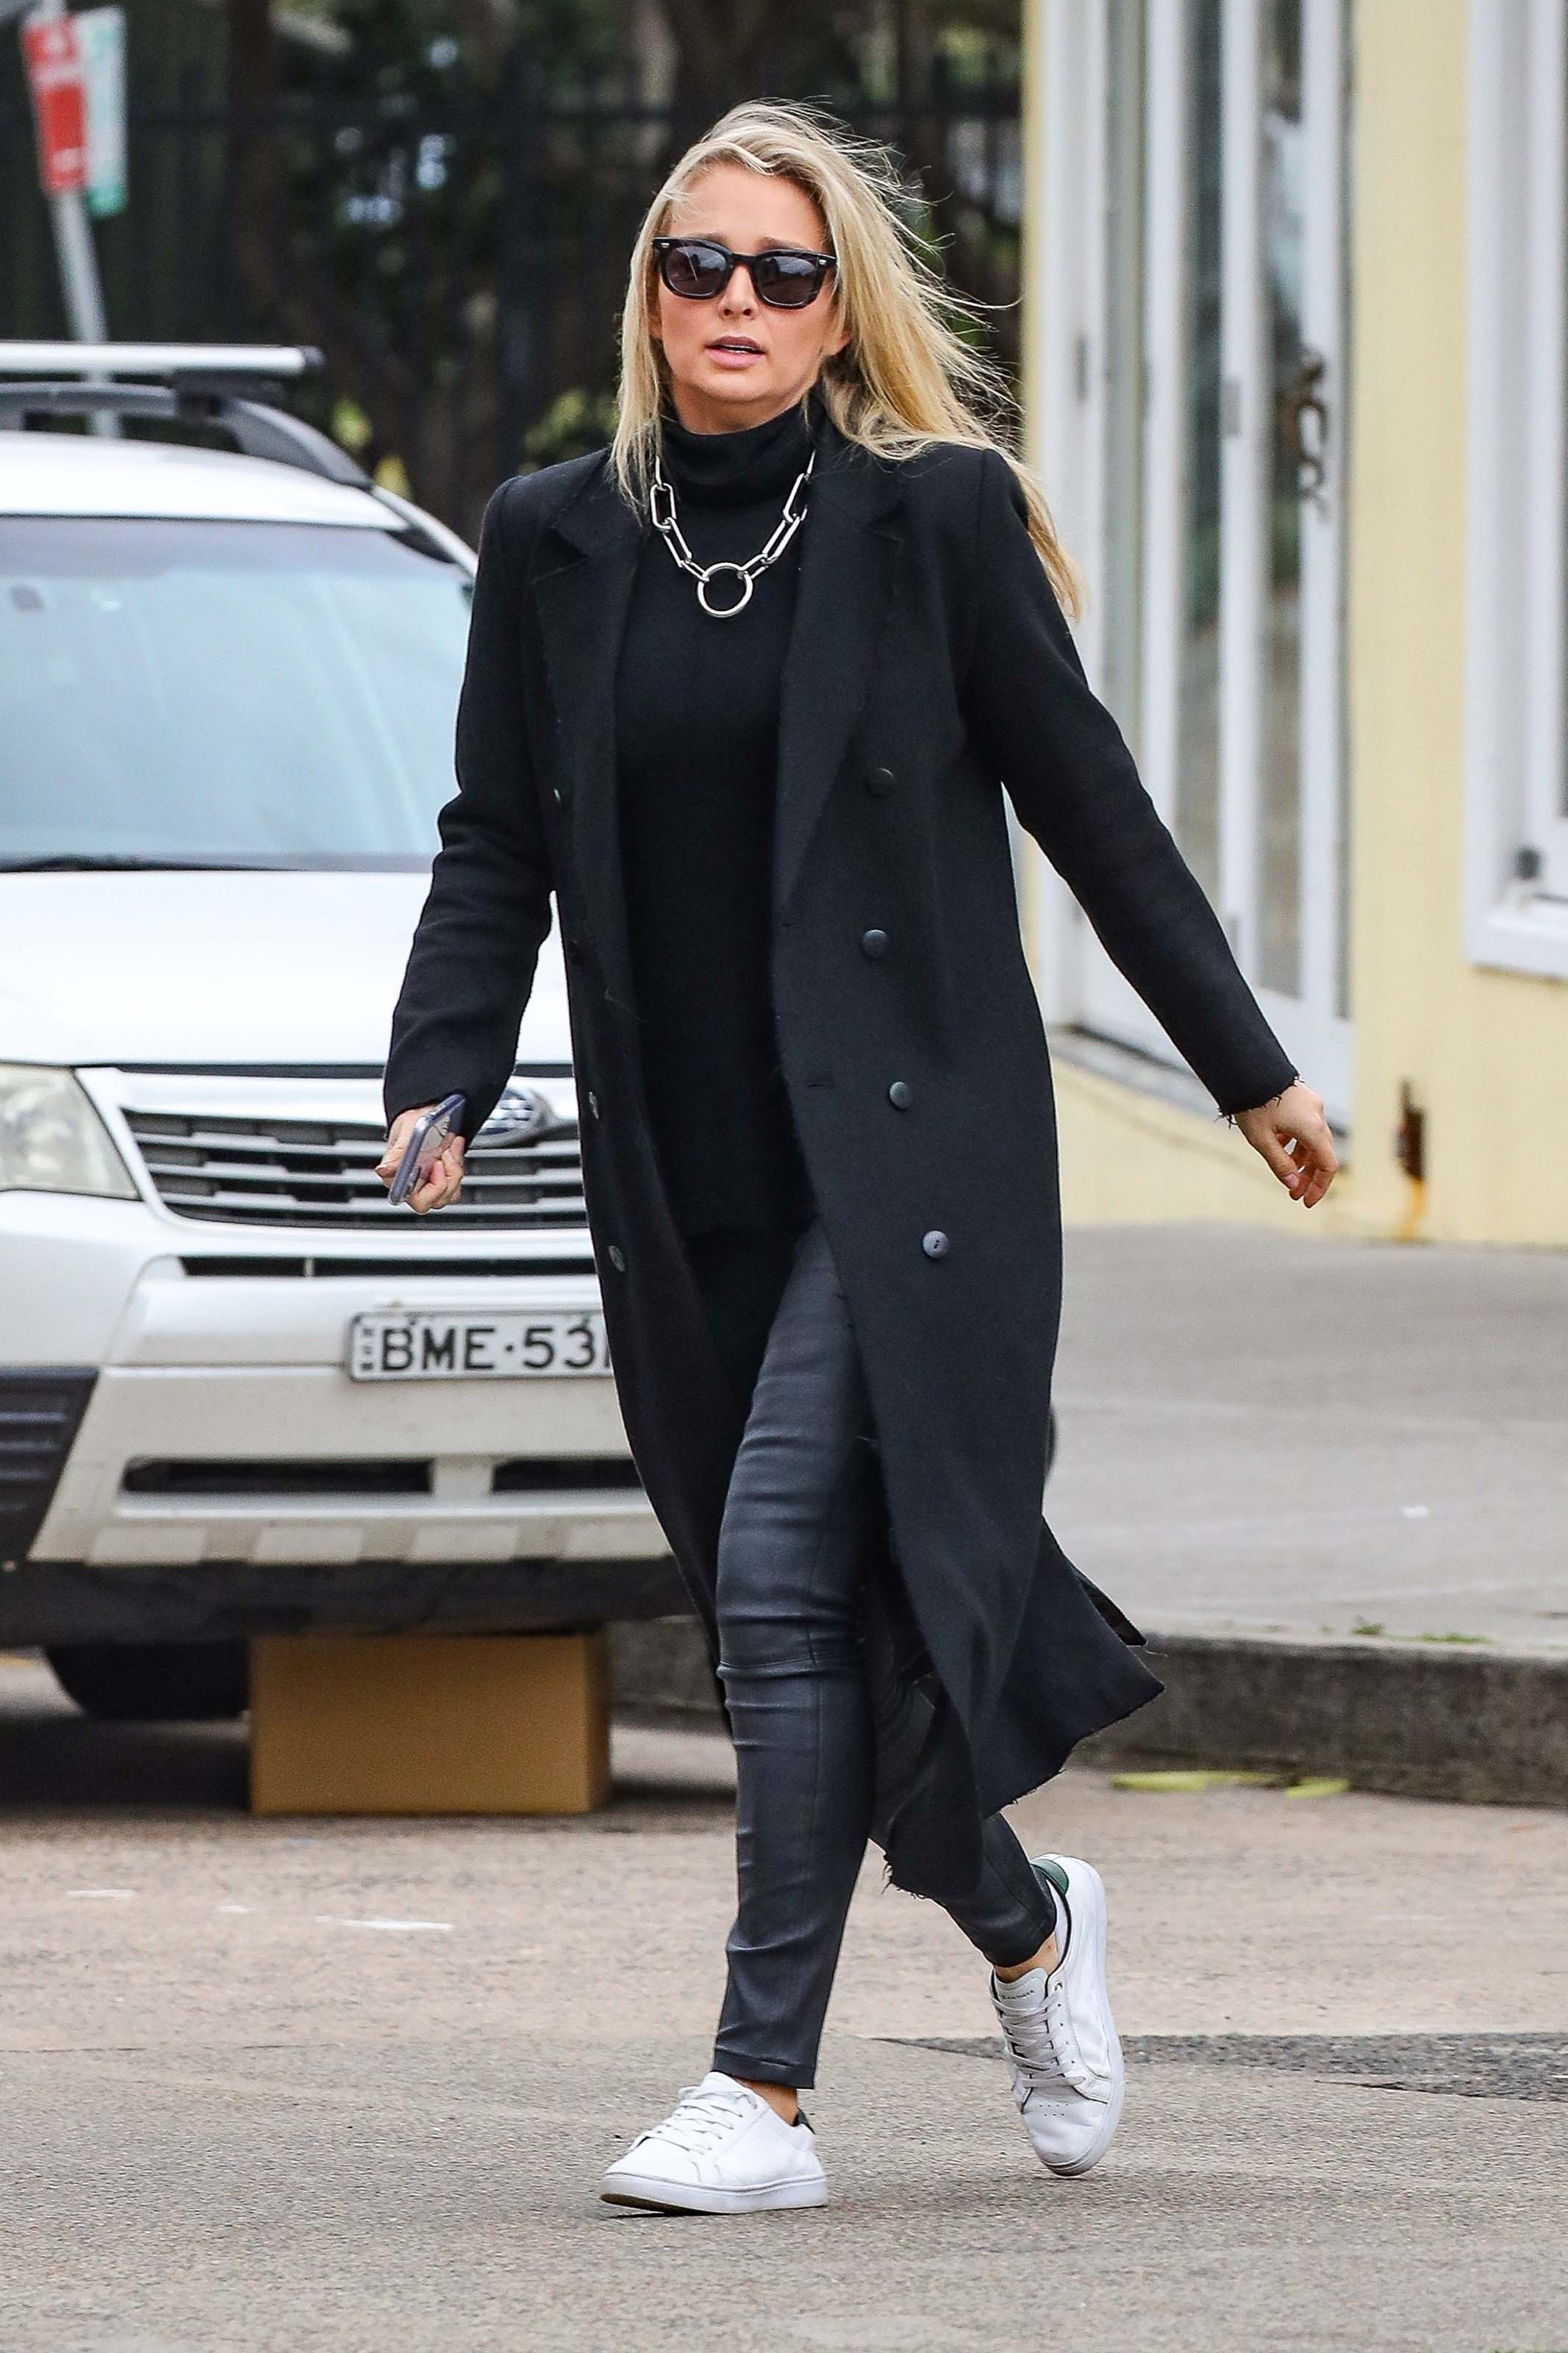 Anna Heinrich stepping out for brunch